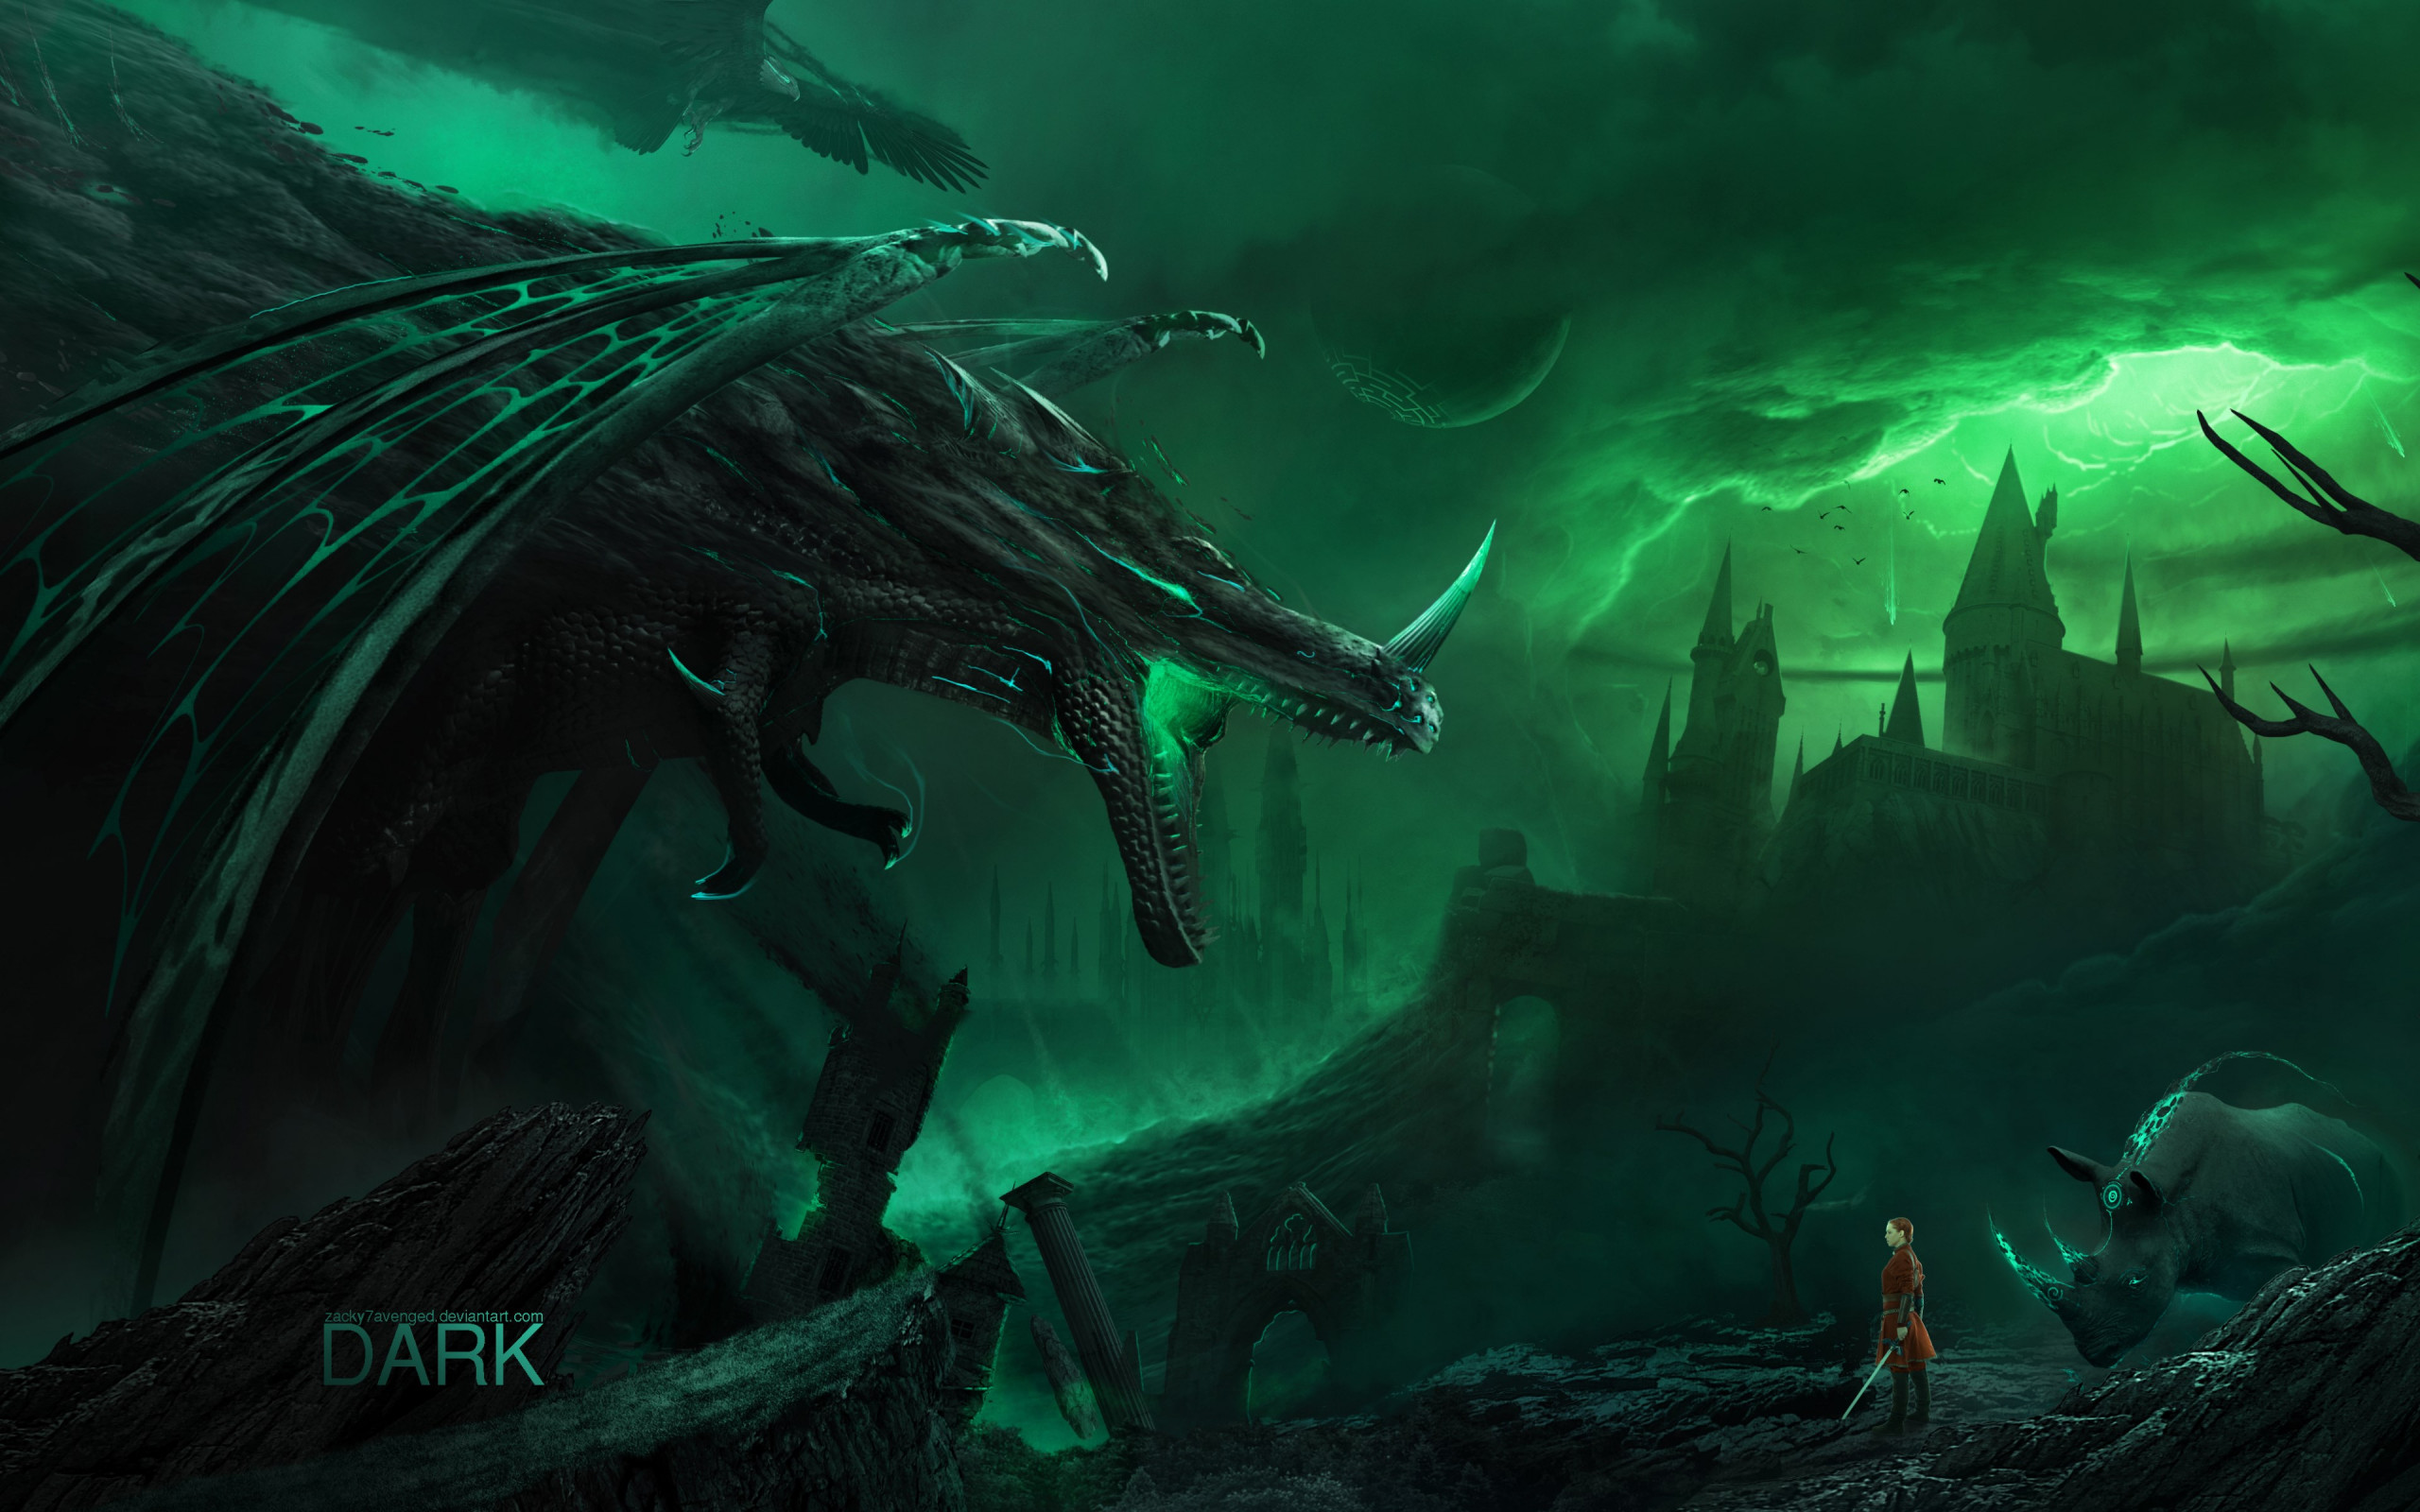 The dark creatures are coming wallpaper 2560x1600